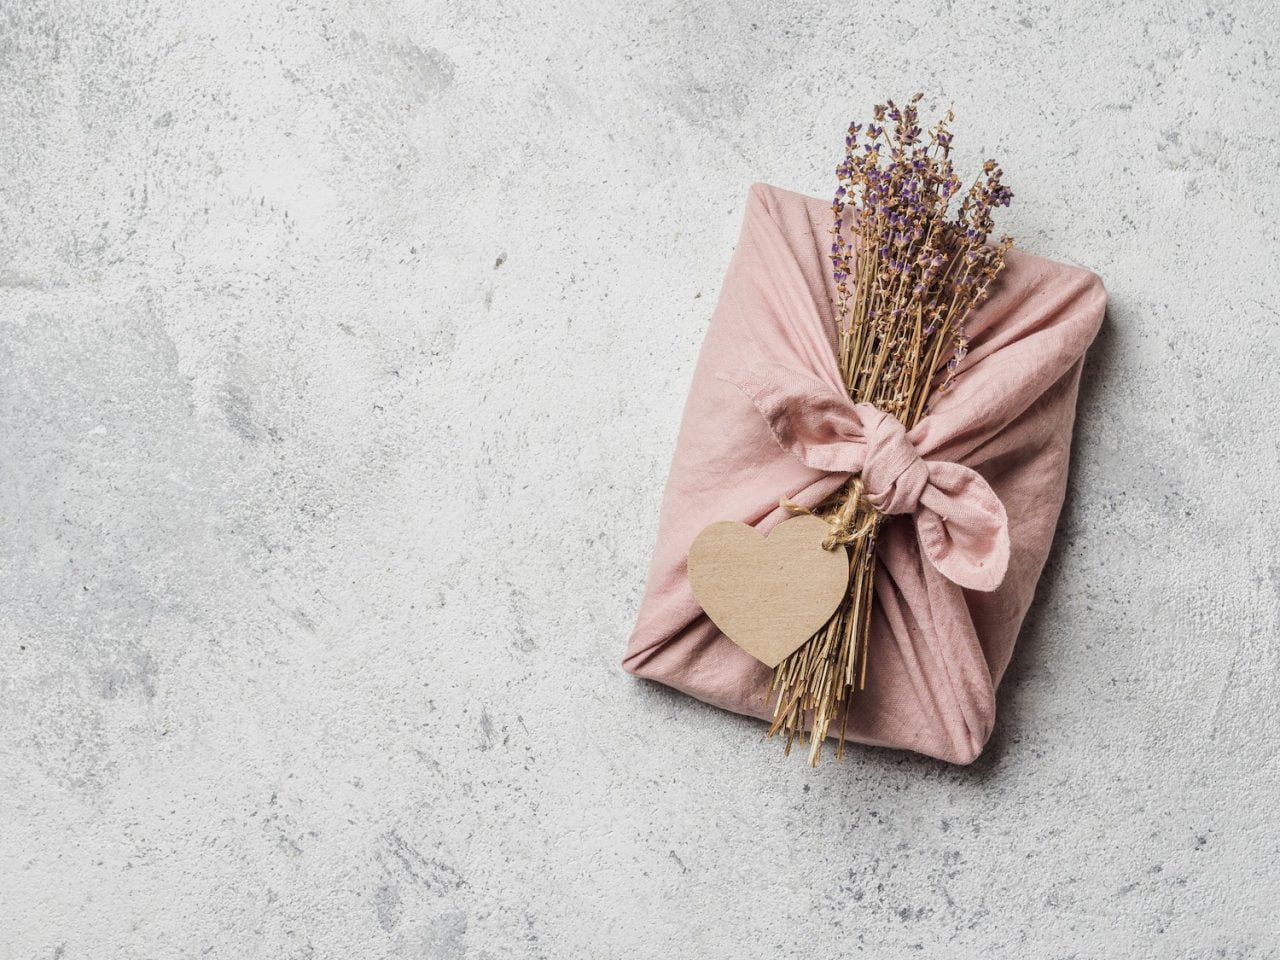 Eco Friendly Gift Ideas for Mother's Day